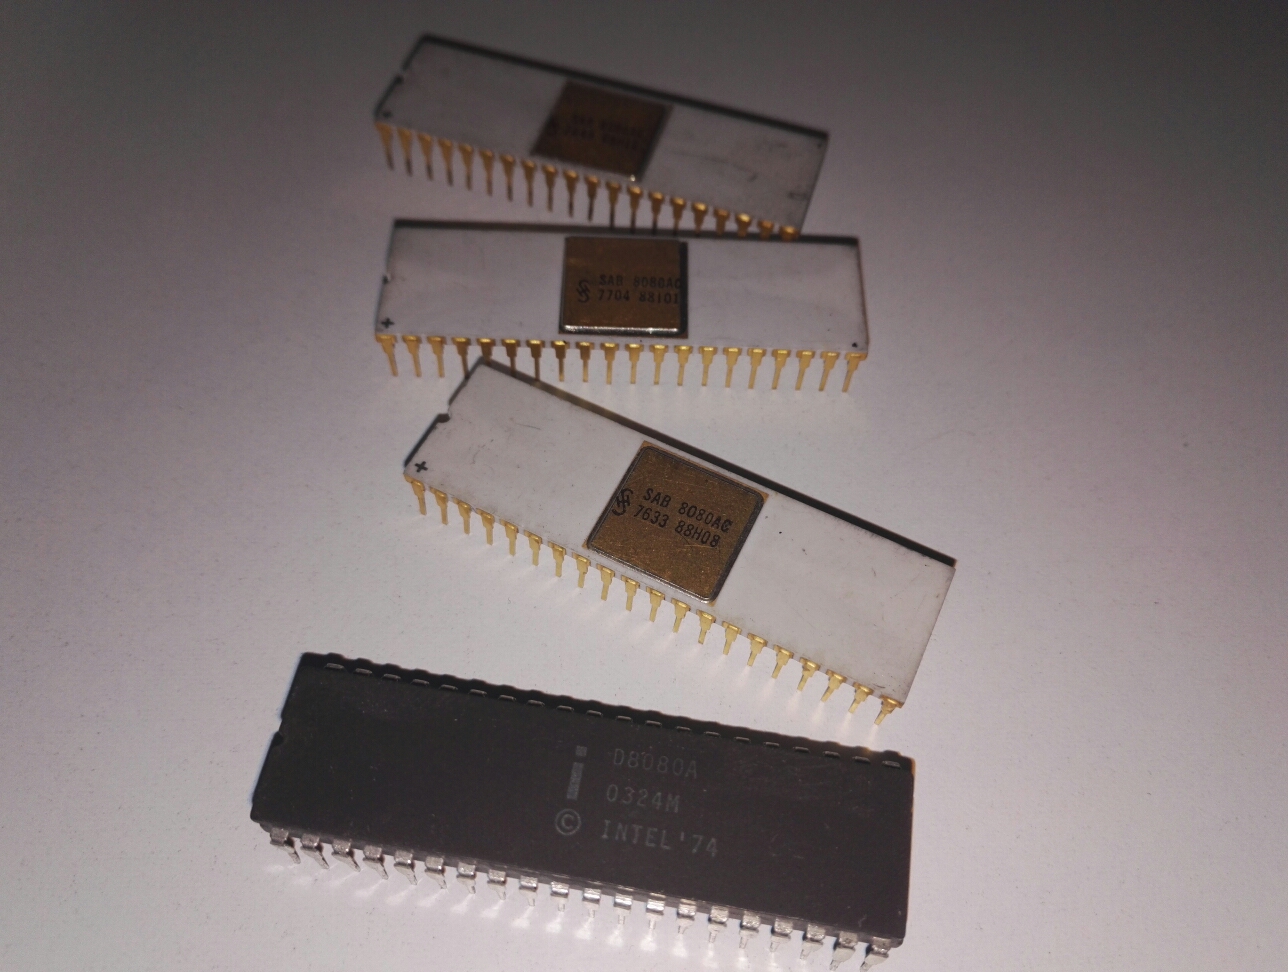 8080s from our magic lab drawer -- Siemens and intel, built in 1976